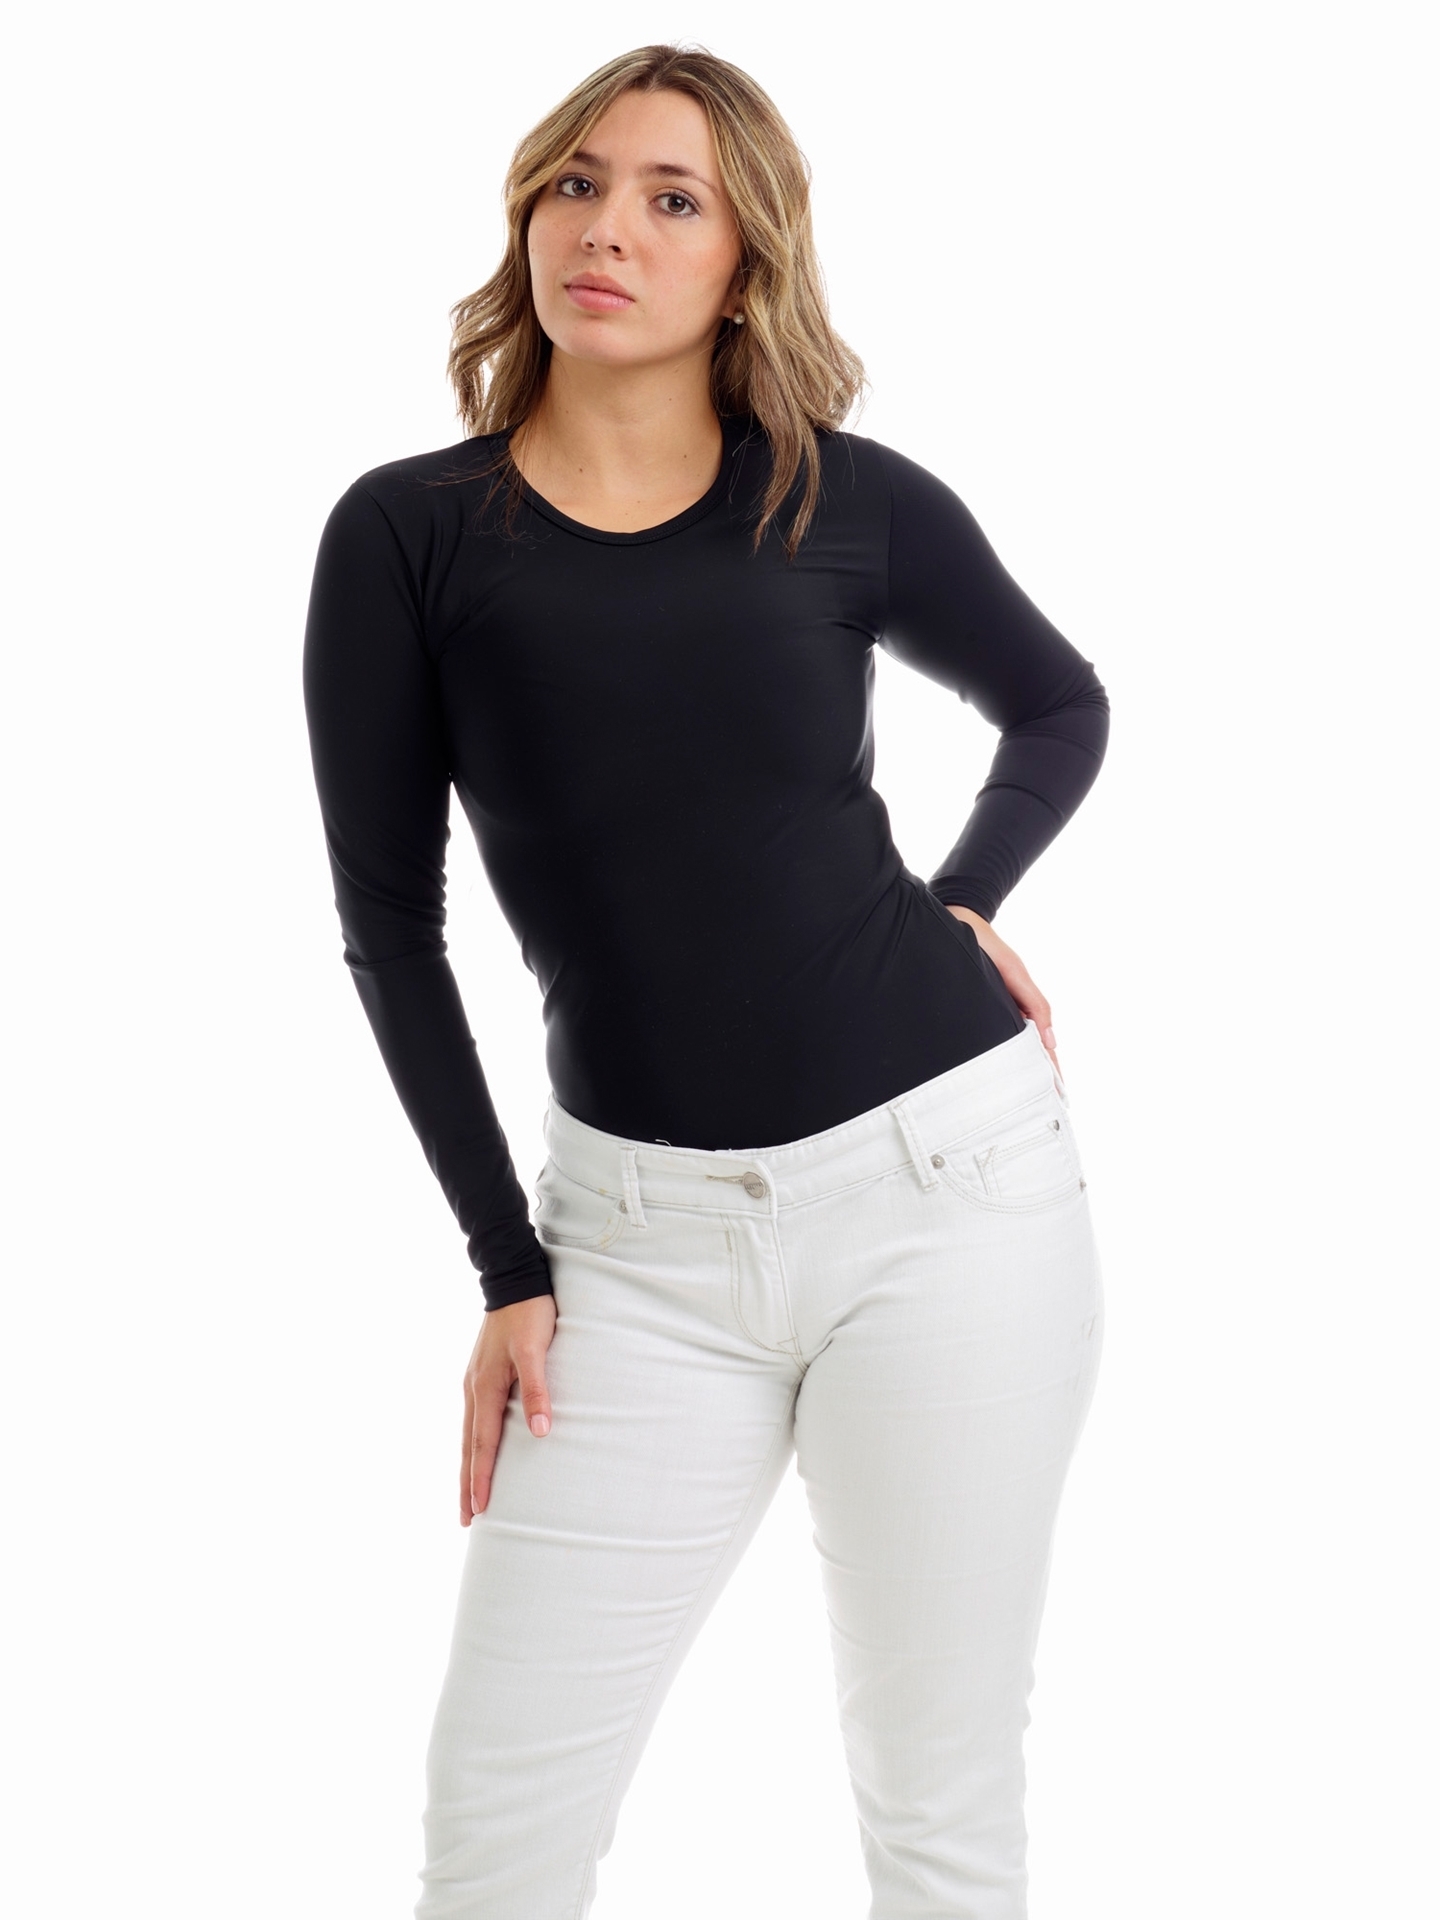 https://www.underworks.com/images/thumbs/0001980_womens-microfiber-compression-crew-neck-top-long-sleeve.jpeg